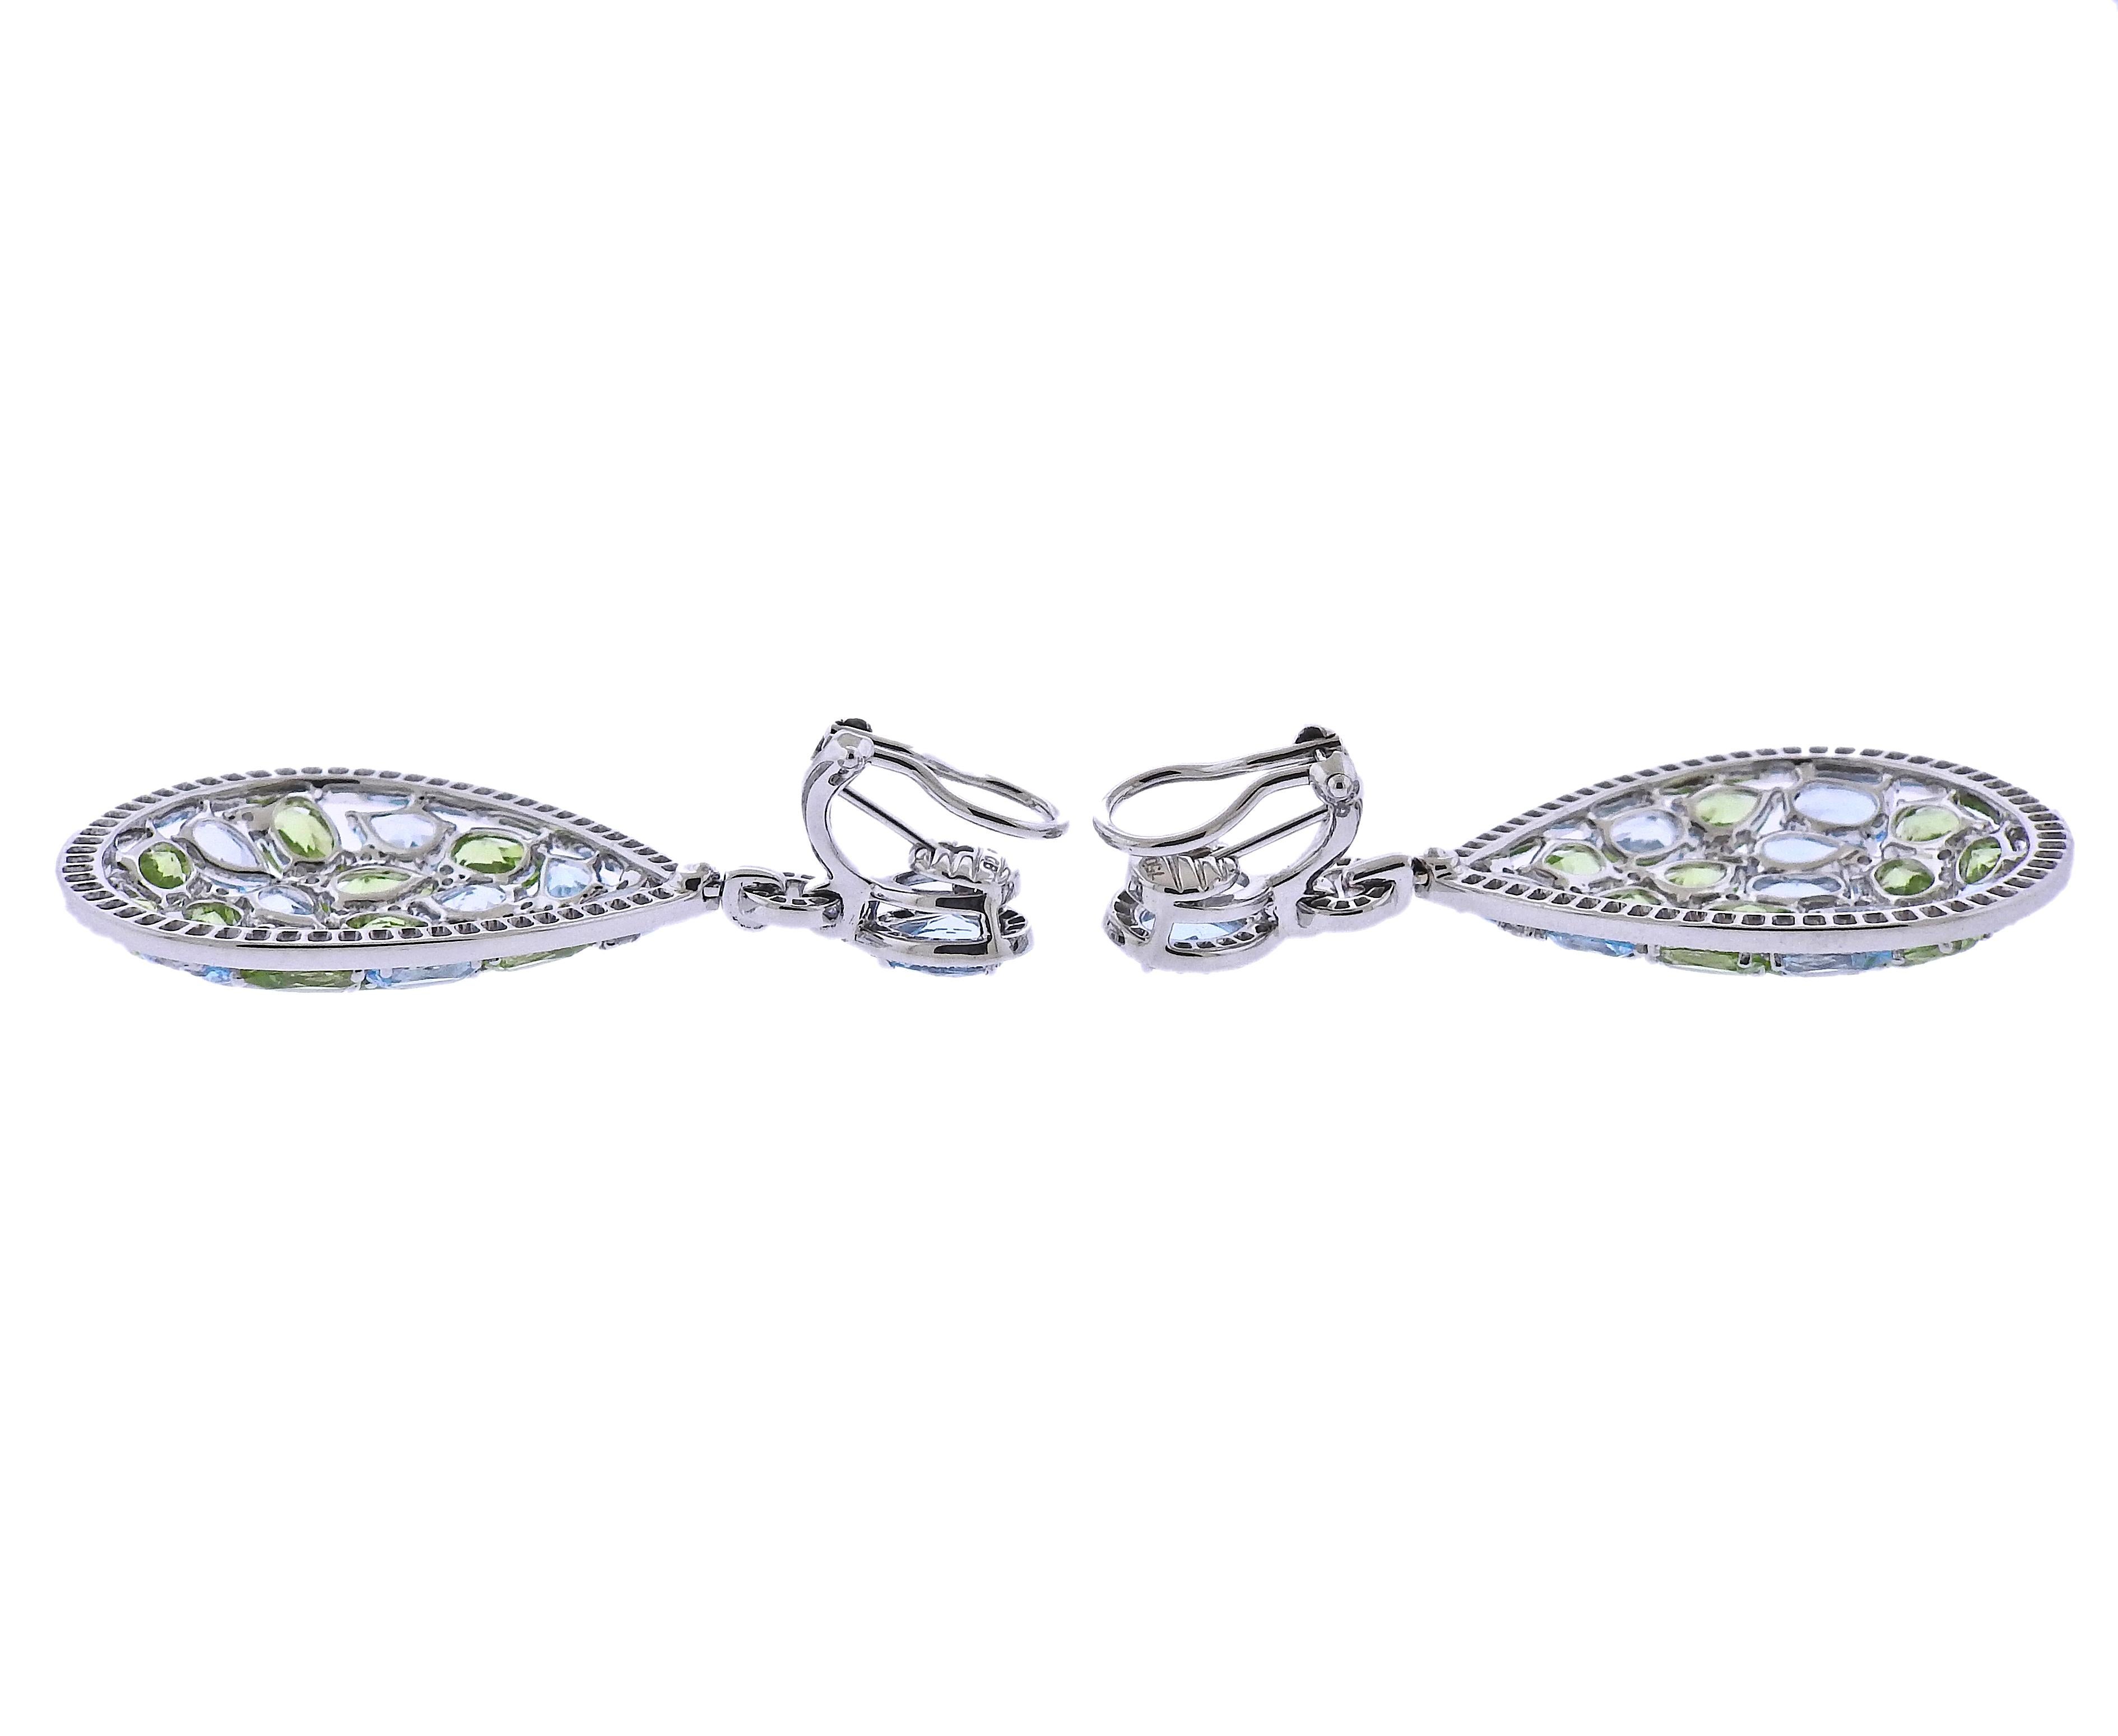 Brand new with tag Bucherer earrings, in 18k gold, with  2.04ctw VS/GH diamonds, 8.49ctw peridot and 9.83ctw topaz.  Retail $14750. Comes with box.  Earrings Measure - 51mm long and 28mm at the widest points, weight 24.8 grams. Marked: CB 750.